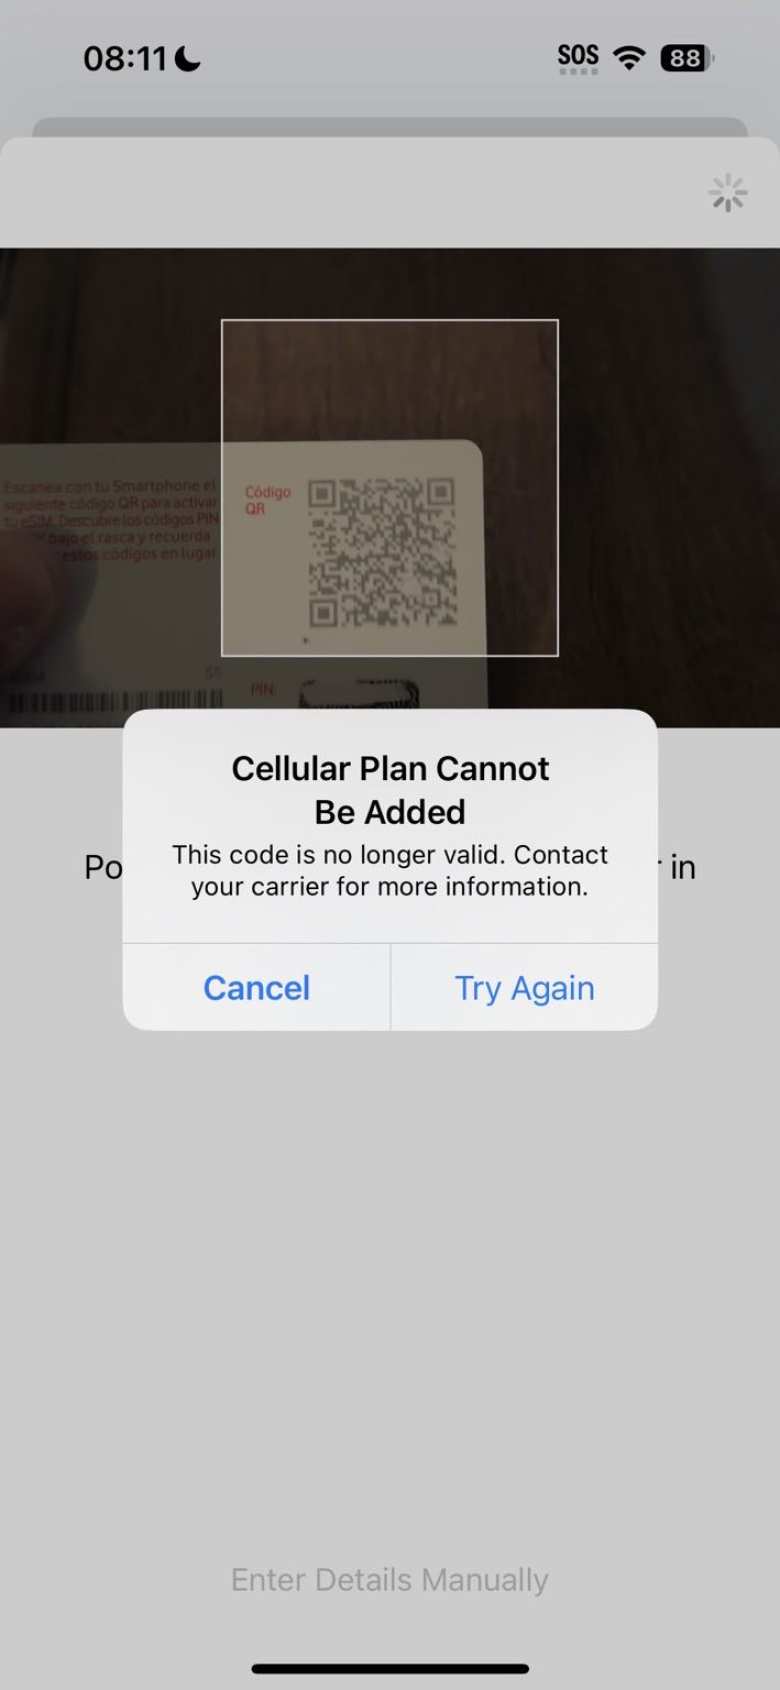 The iPhone 14 Pro gave the error message "Cellular Plan Cannot Be Added" because I had not deleted it from my old phone.